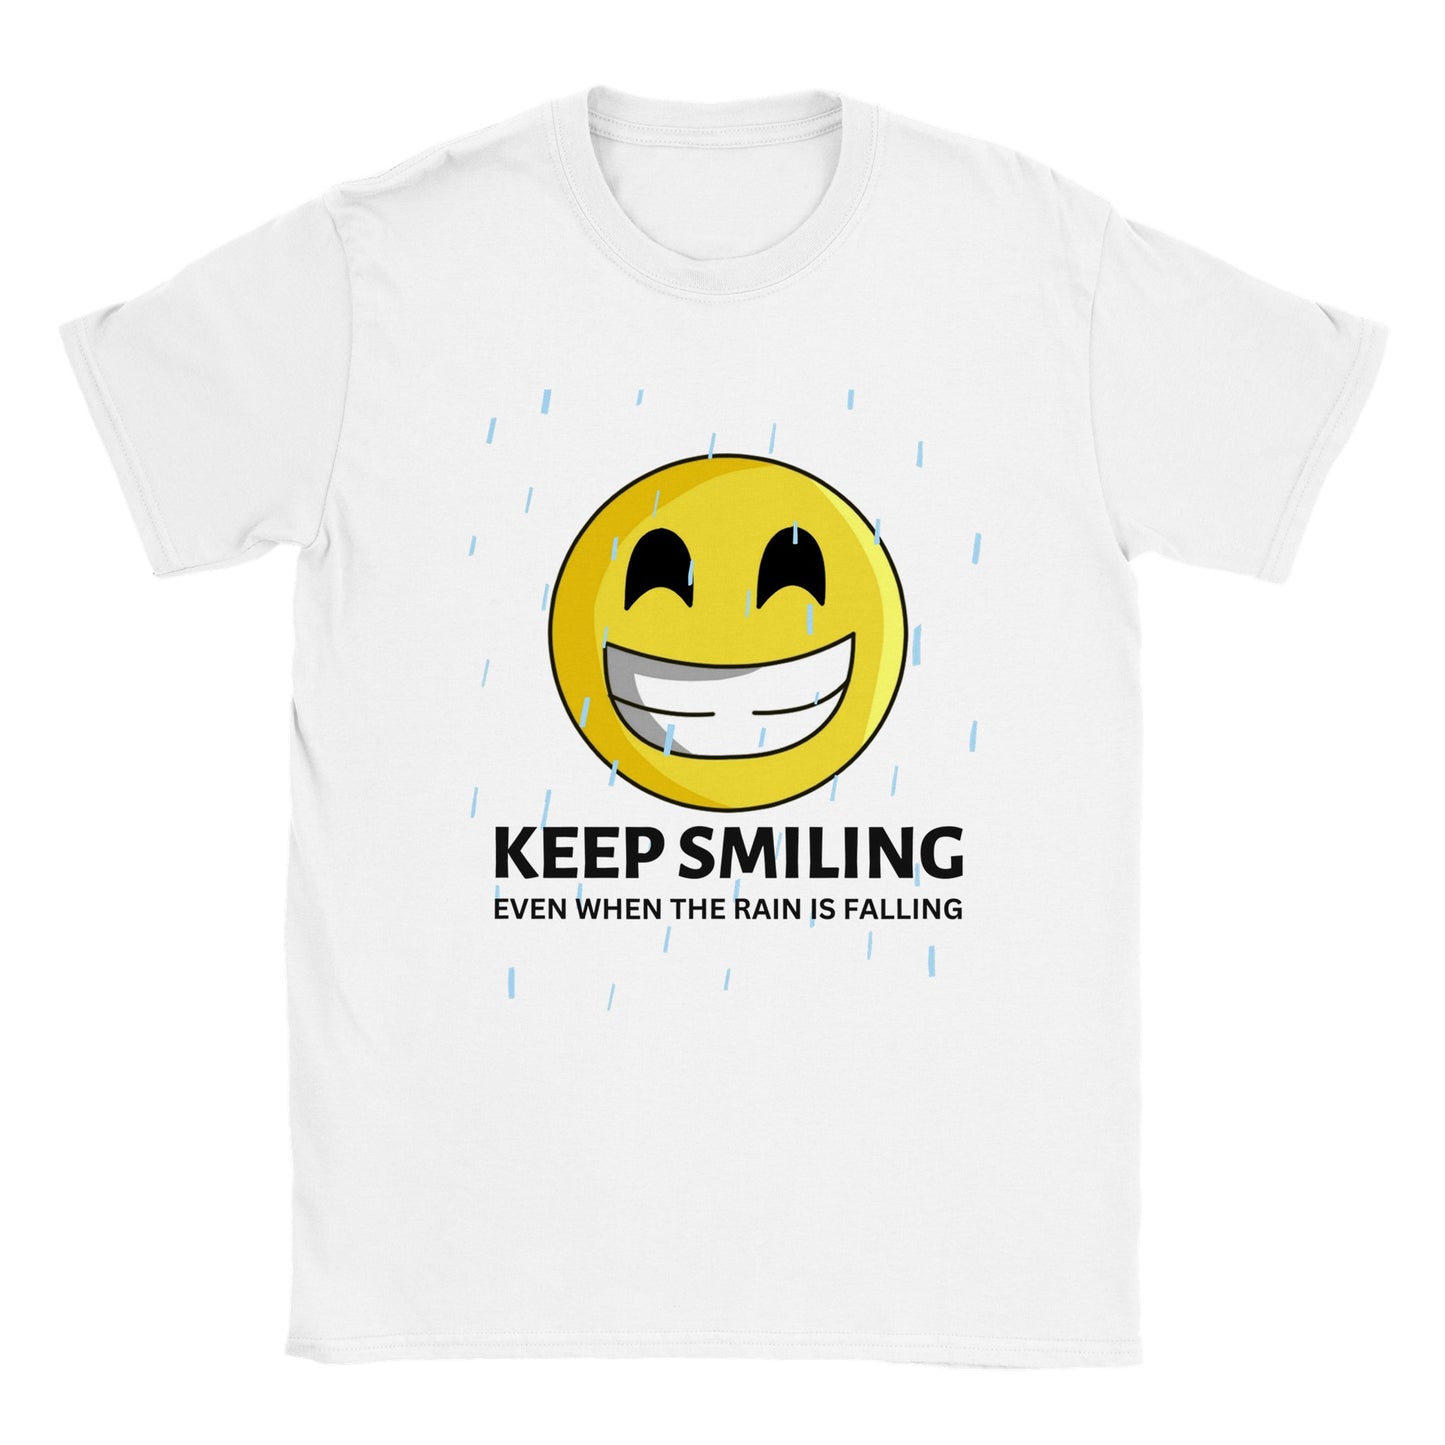 Inspirational Kids T-shirt: "I Keep Smiling" - Fashion With Meaning